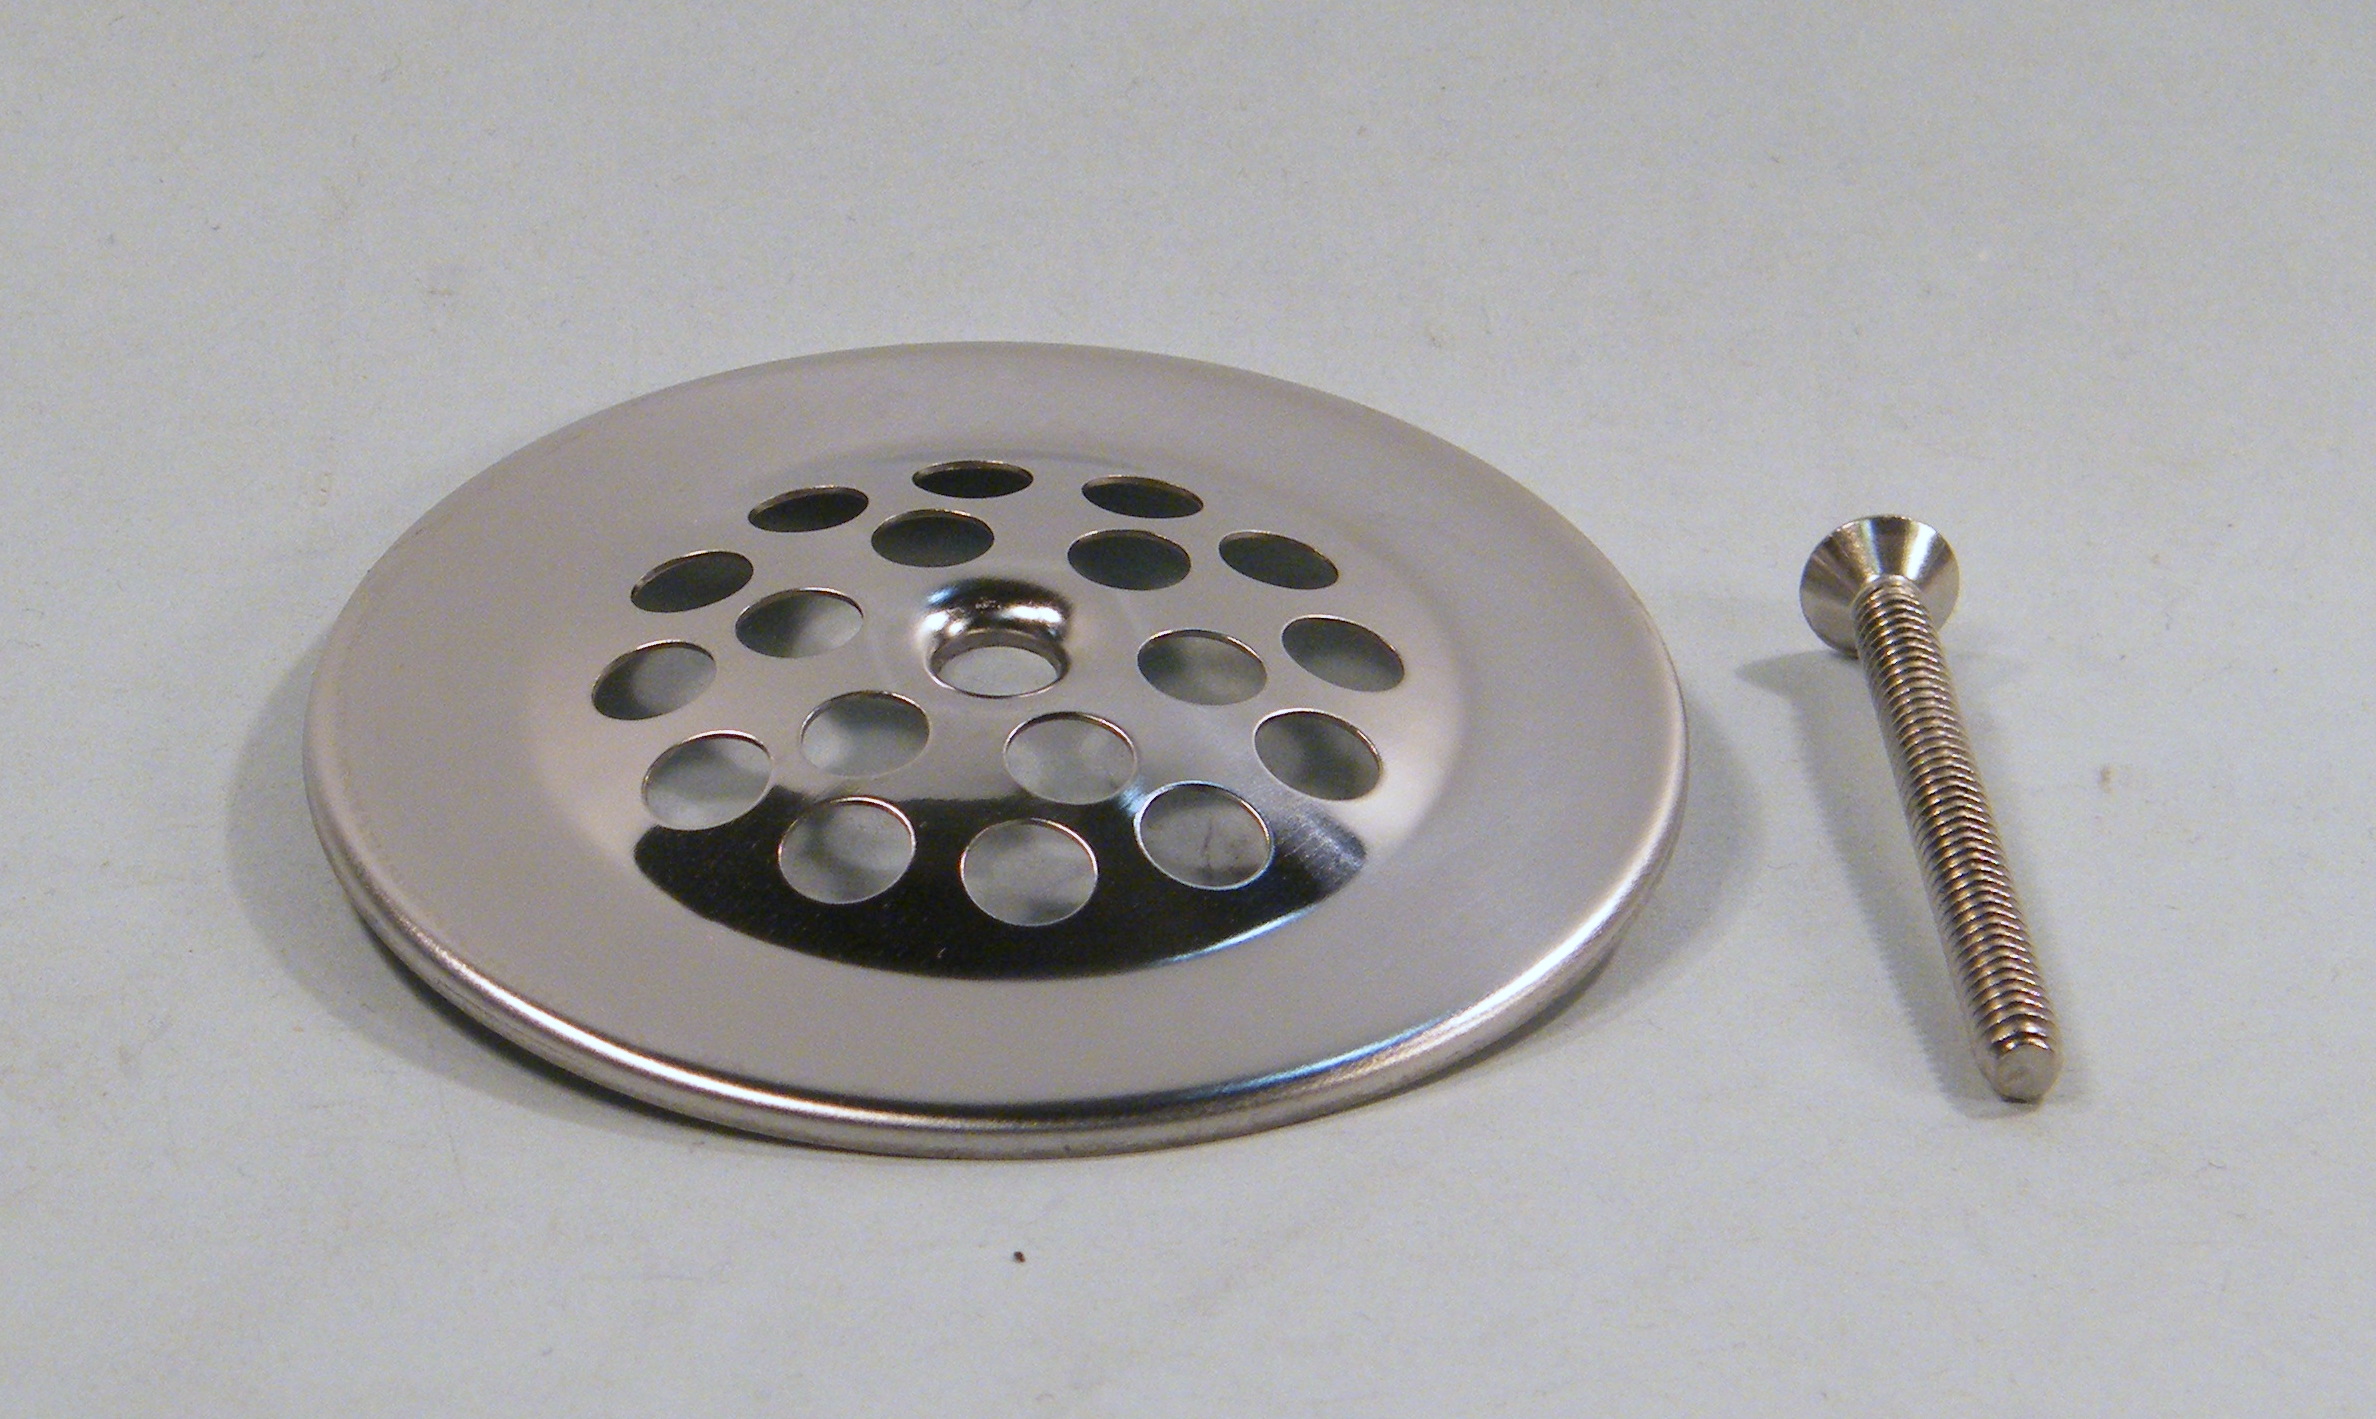 BATH DRAIN DOMED STRAINER AND SCREW